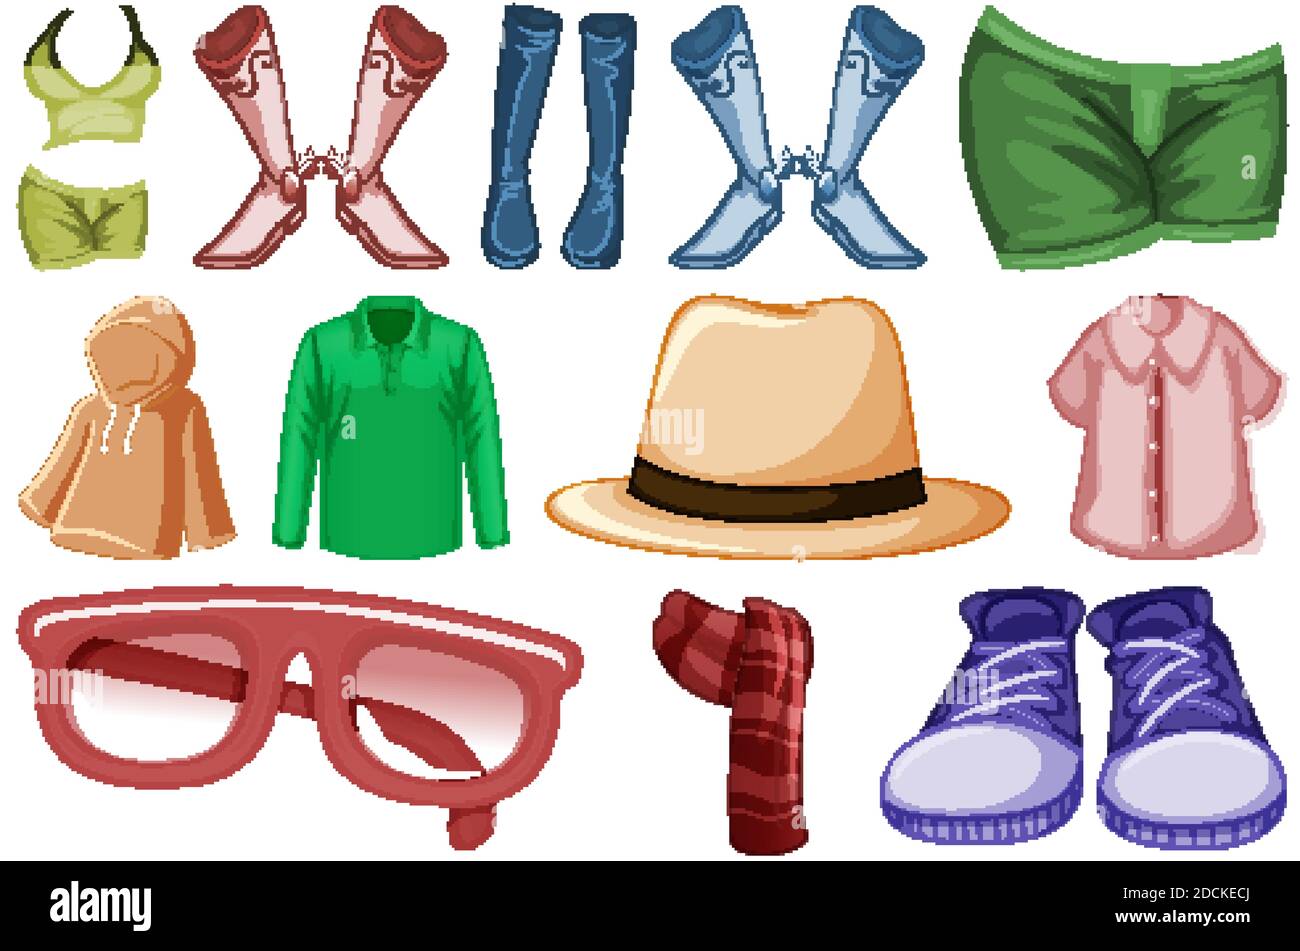 Set of fashion outfits and accessories on white background illustration ...